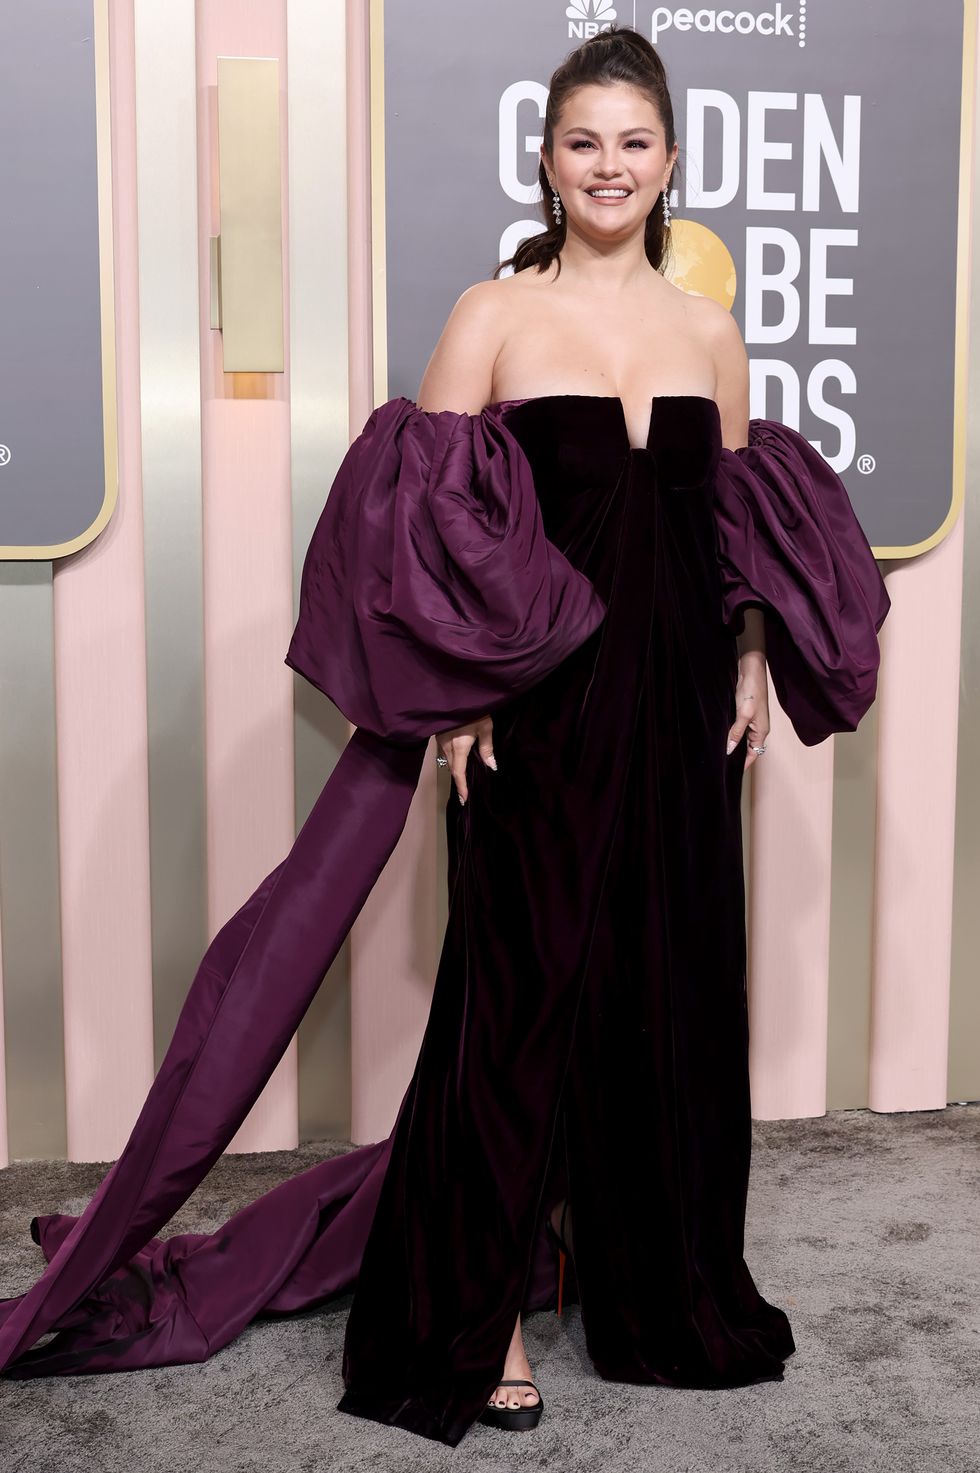 beverly hills, california january 10 selena gomez attends the 80th annual golden globe awards at the beverly hilton on january 10, 2023 in beverly hills, california photo by amy sussmangetty images